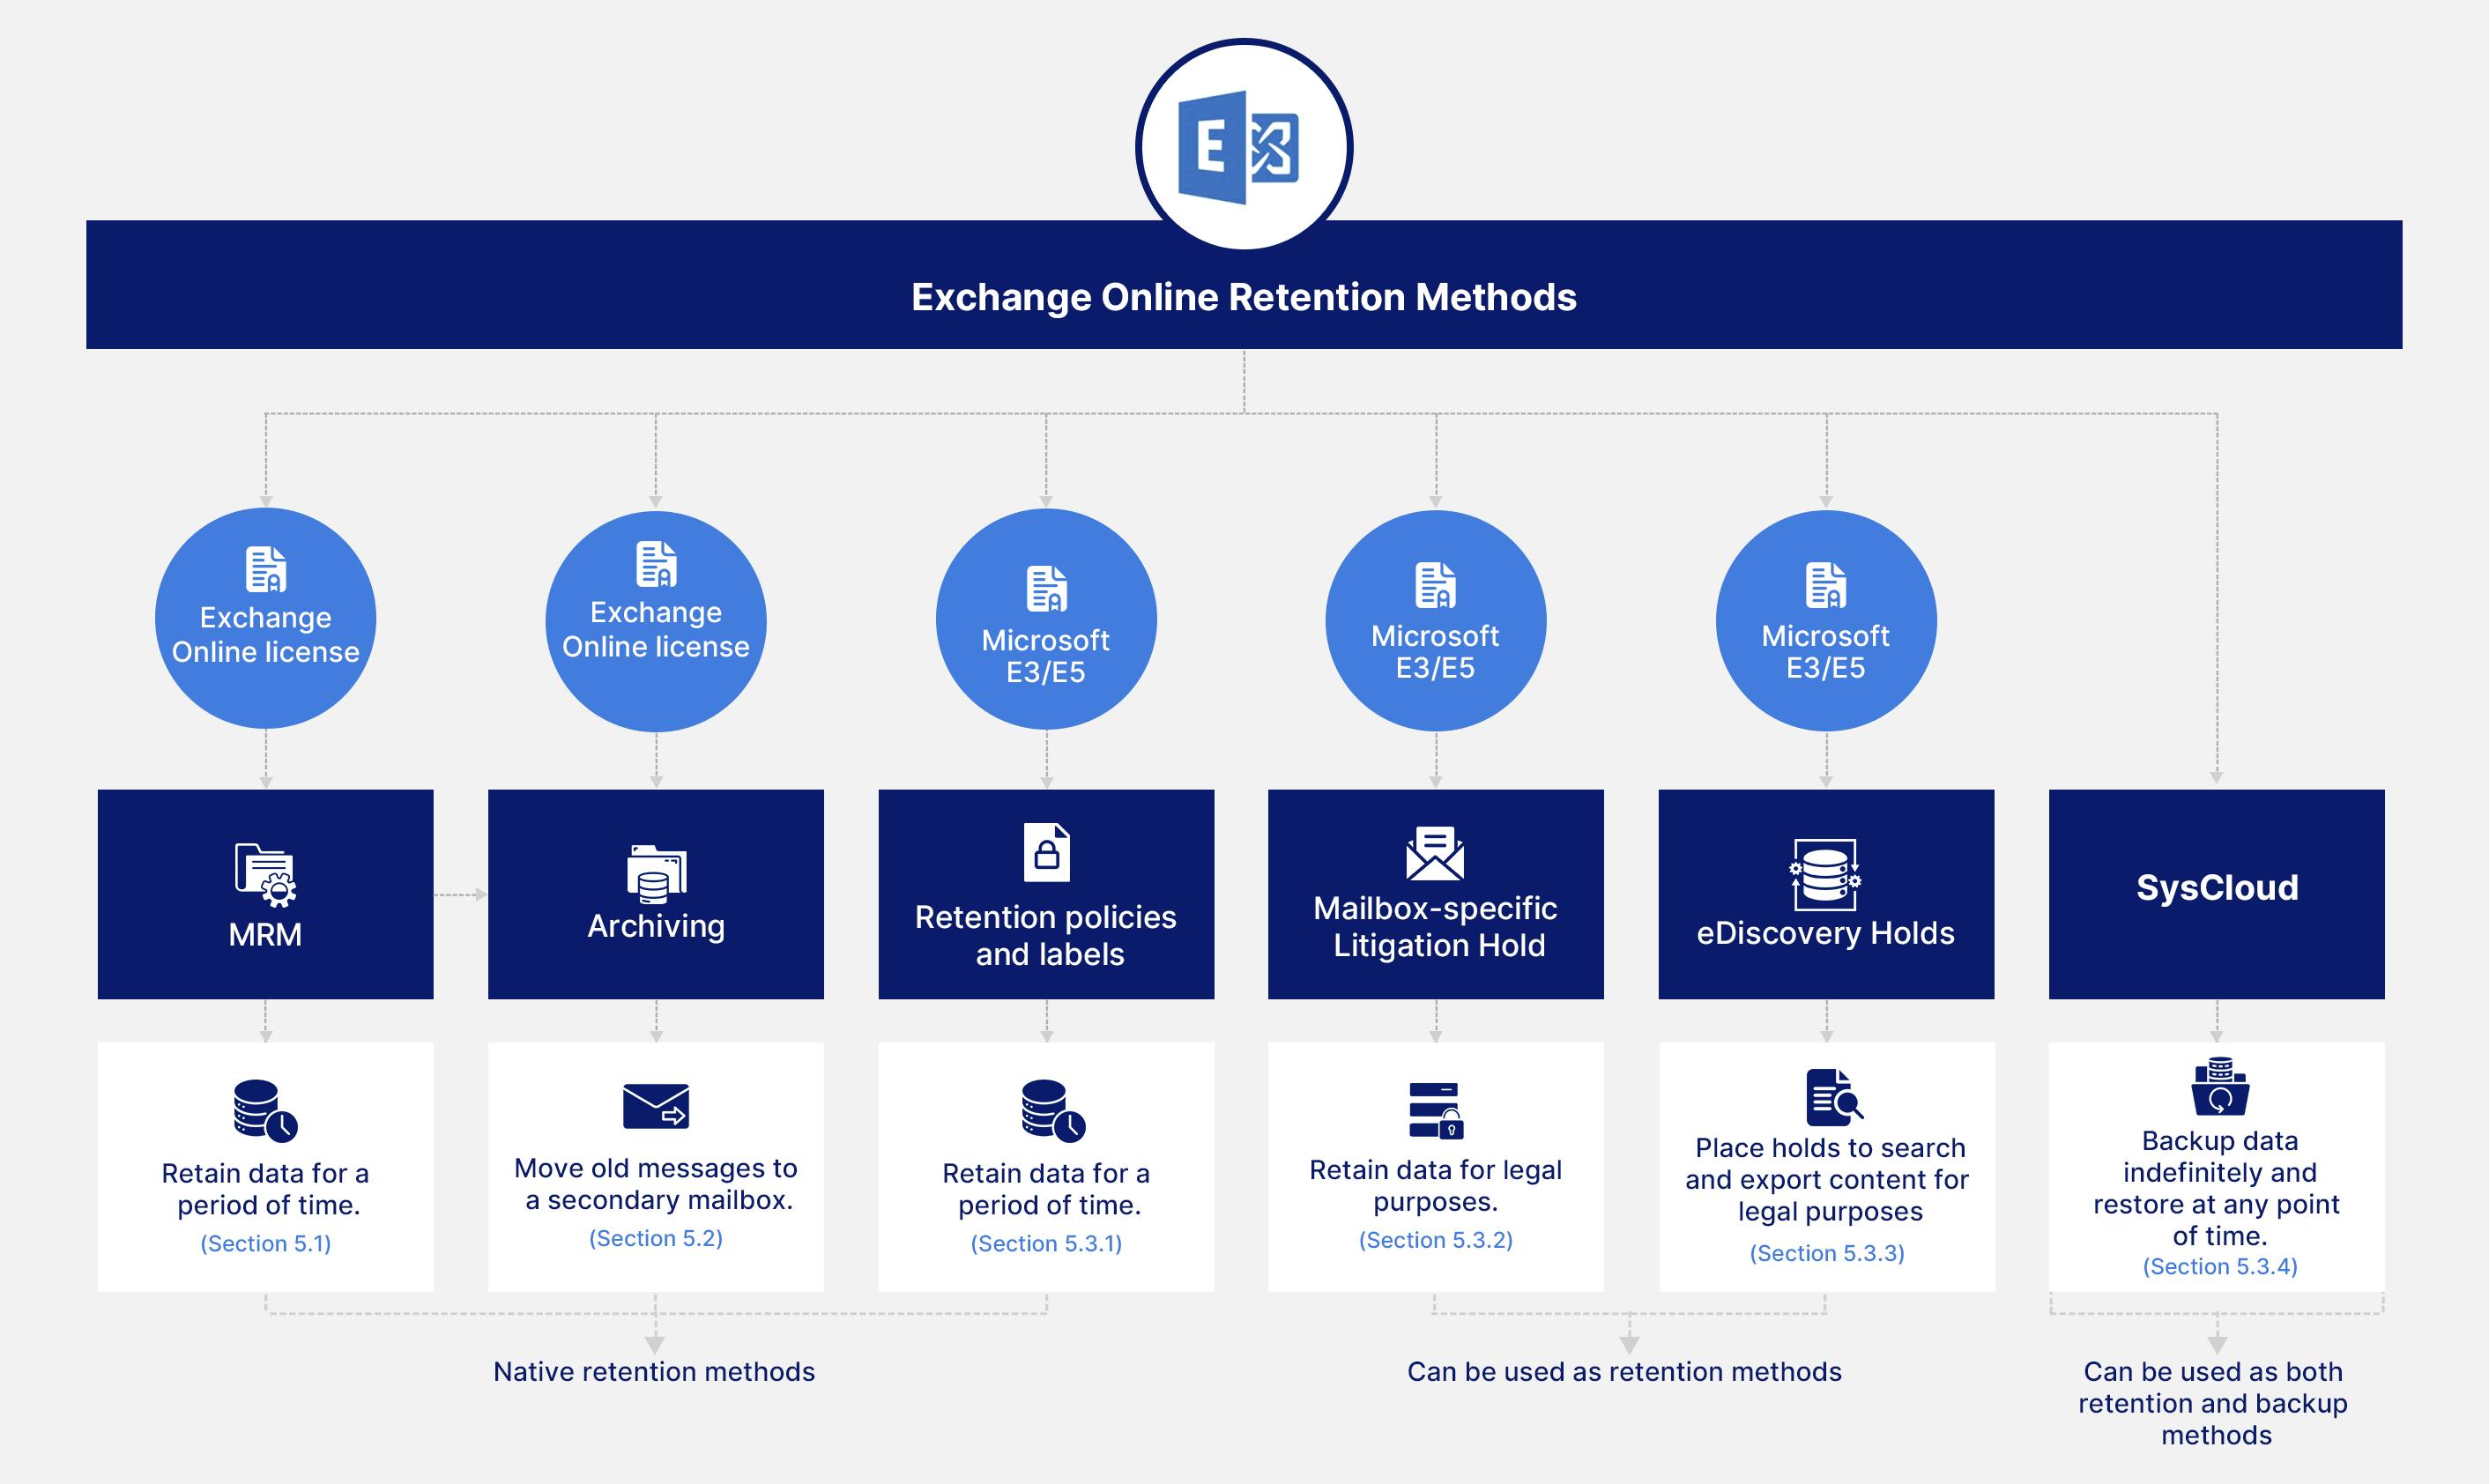 Admin'S Guide To Exchange Online Retention | Syscloud